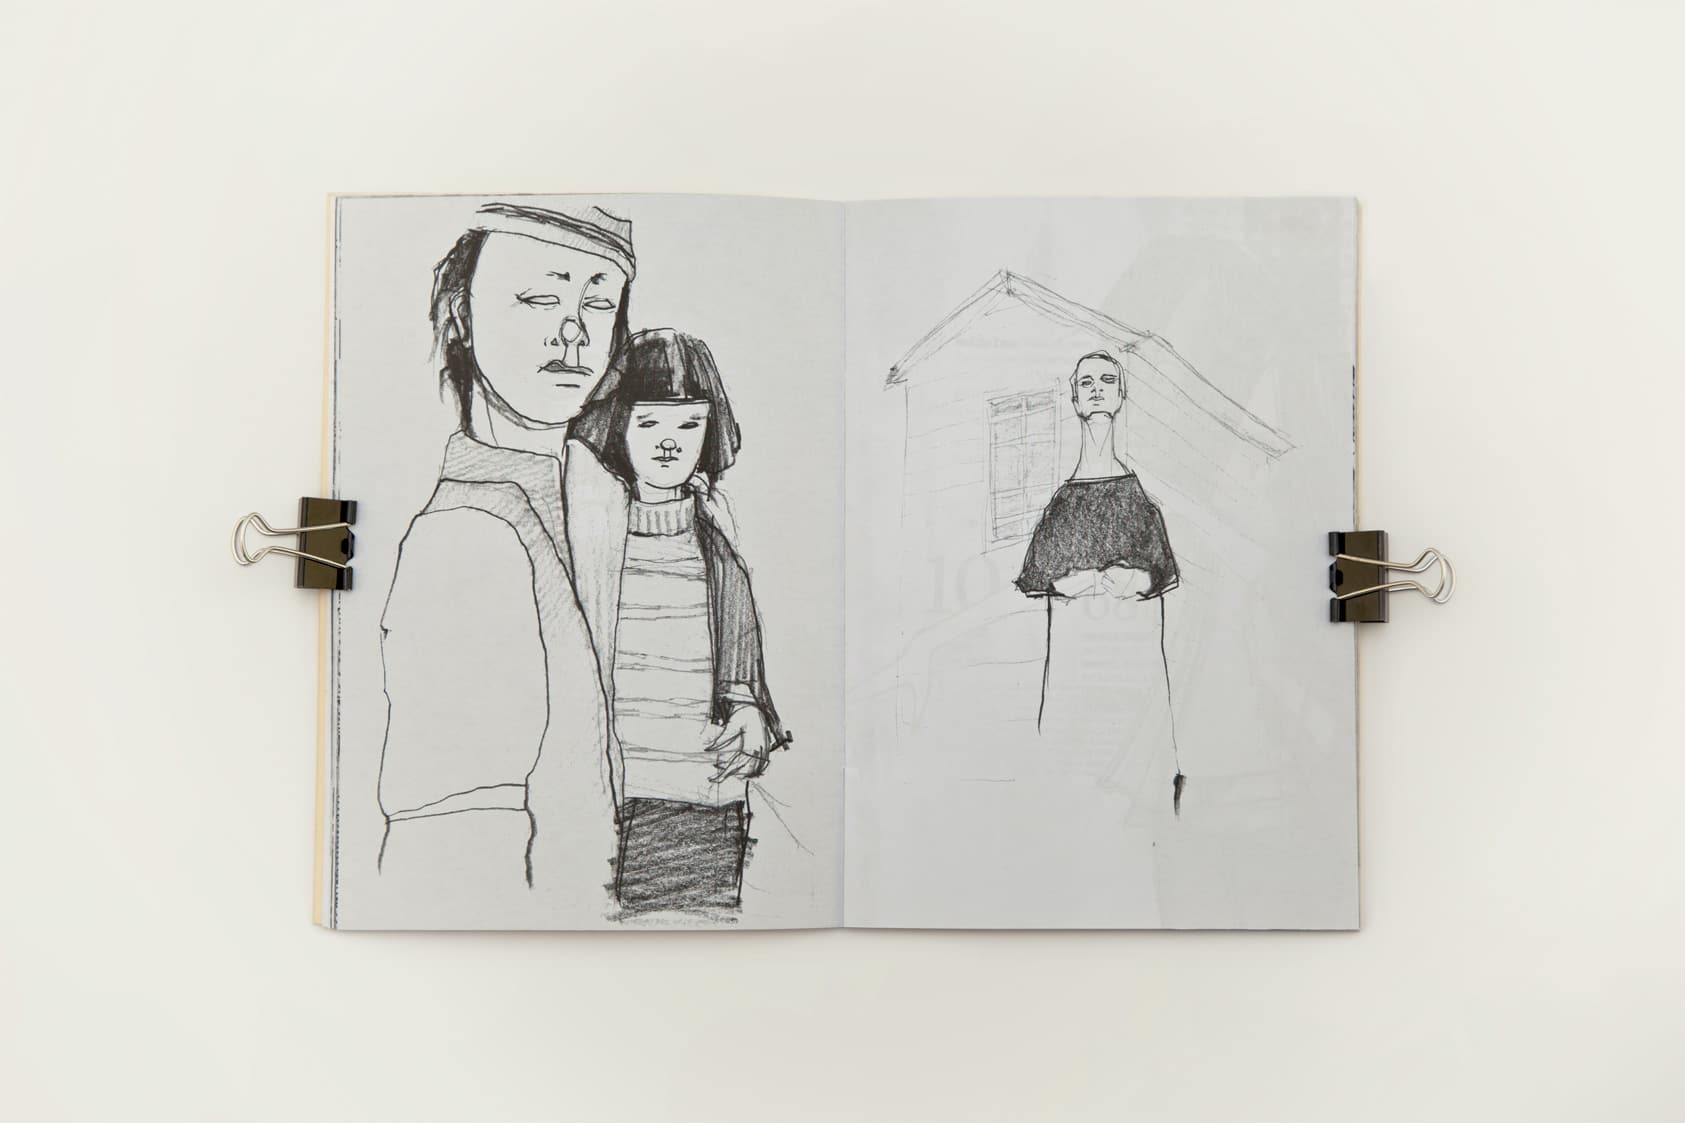 Self-published Fanzine with a compilation of illustrations and sketches made during 2006 and 2008.